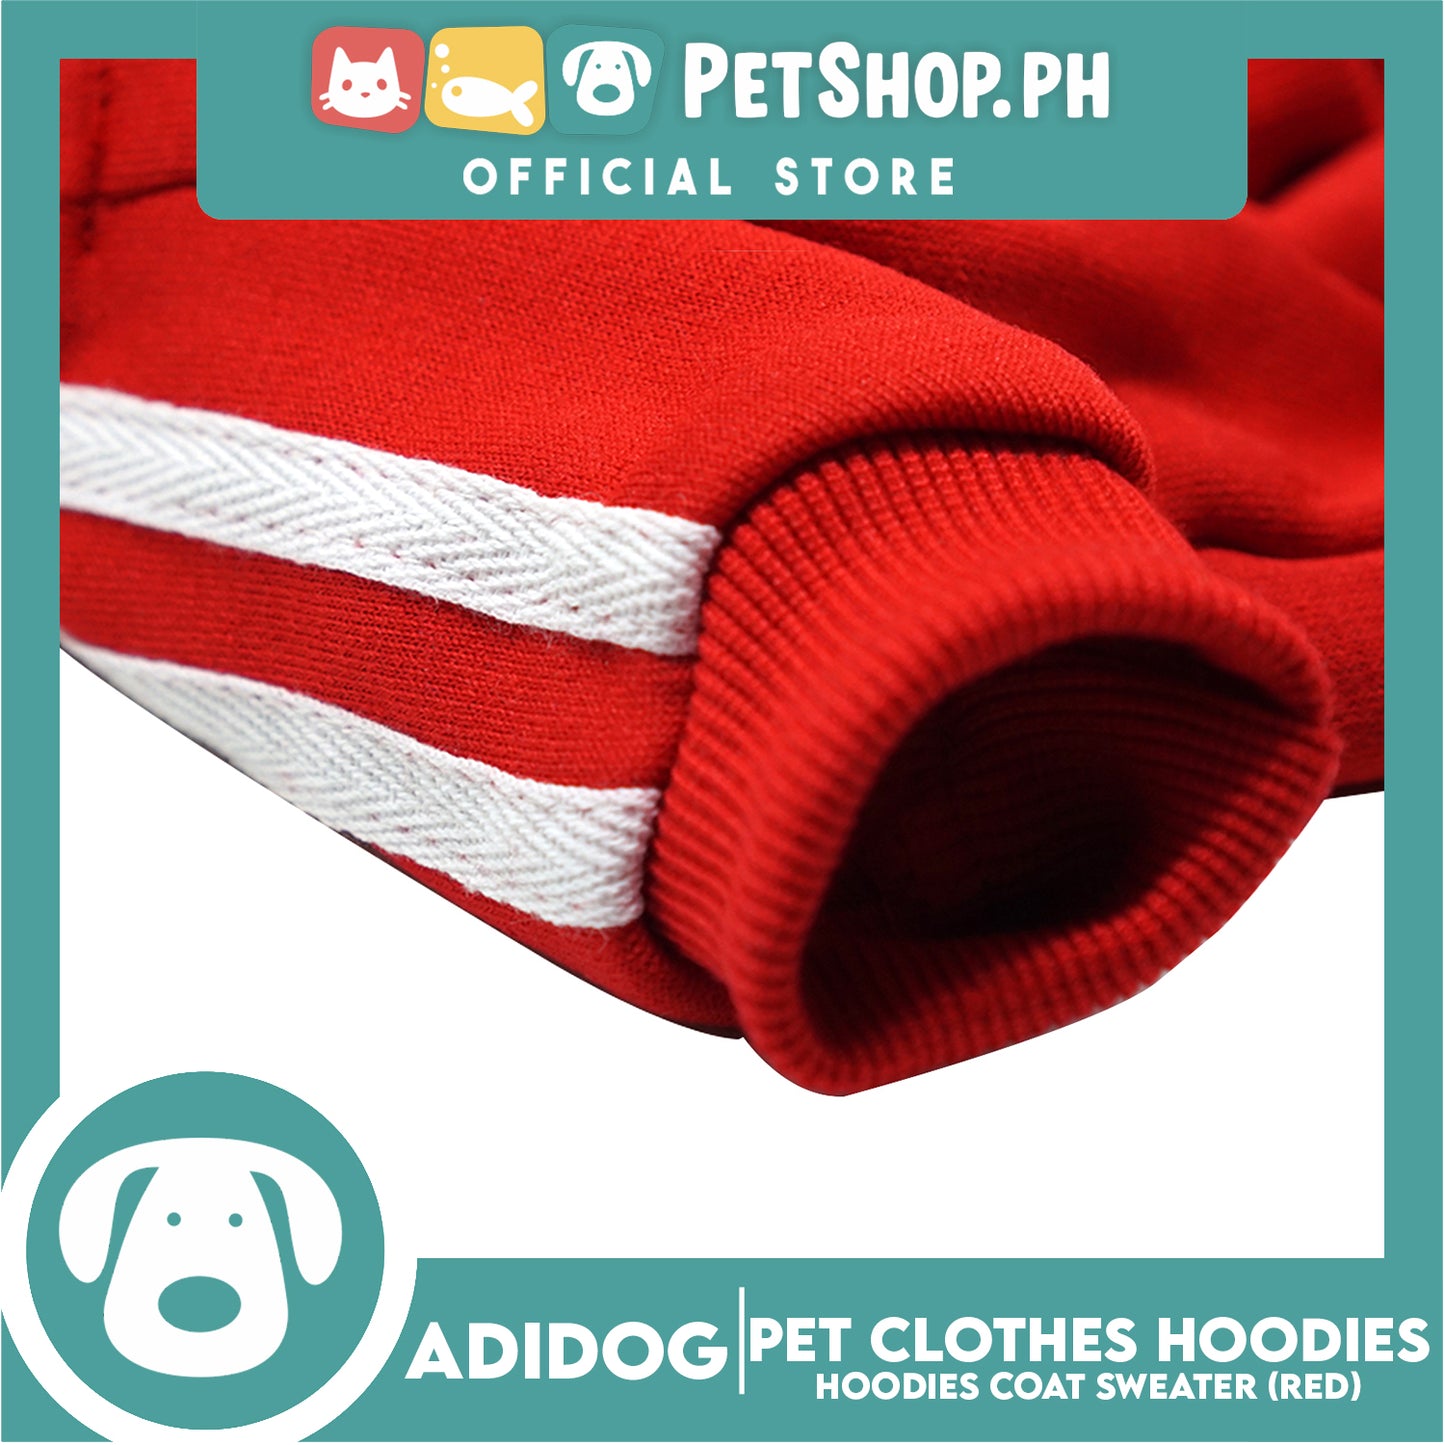 Adidog Pet Clothes Hoodies,Winter Hoodies Apparel Puppy Warm Hoodies Coat Sweater (Red) Extra Small